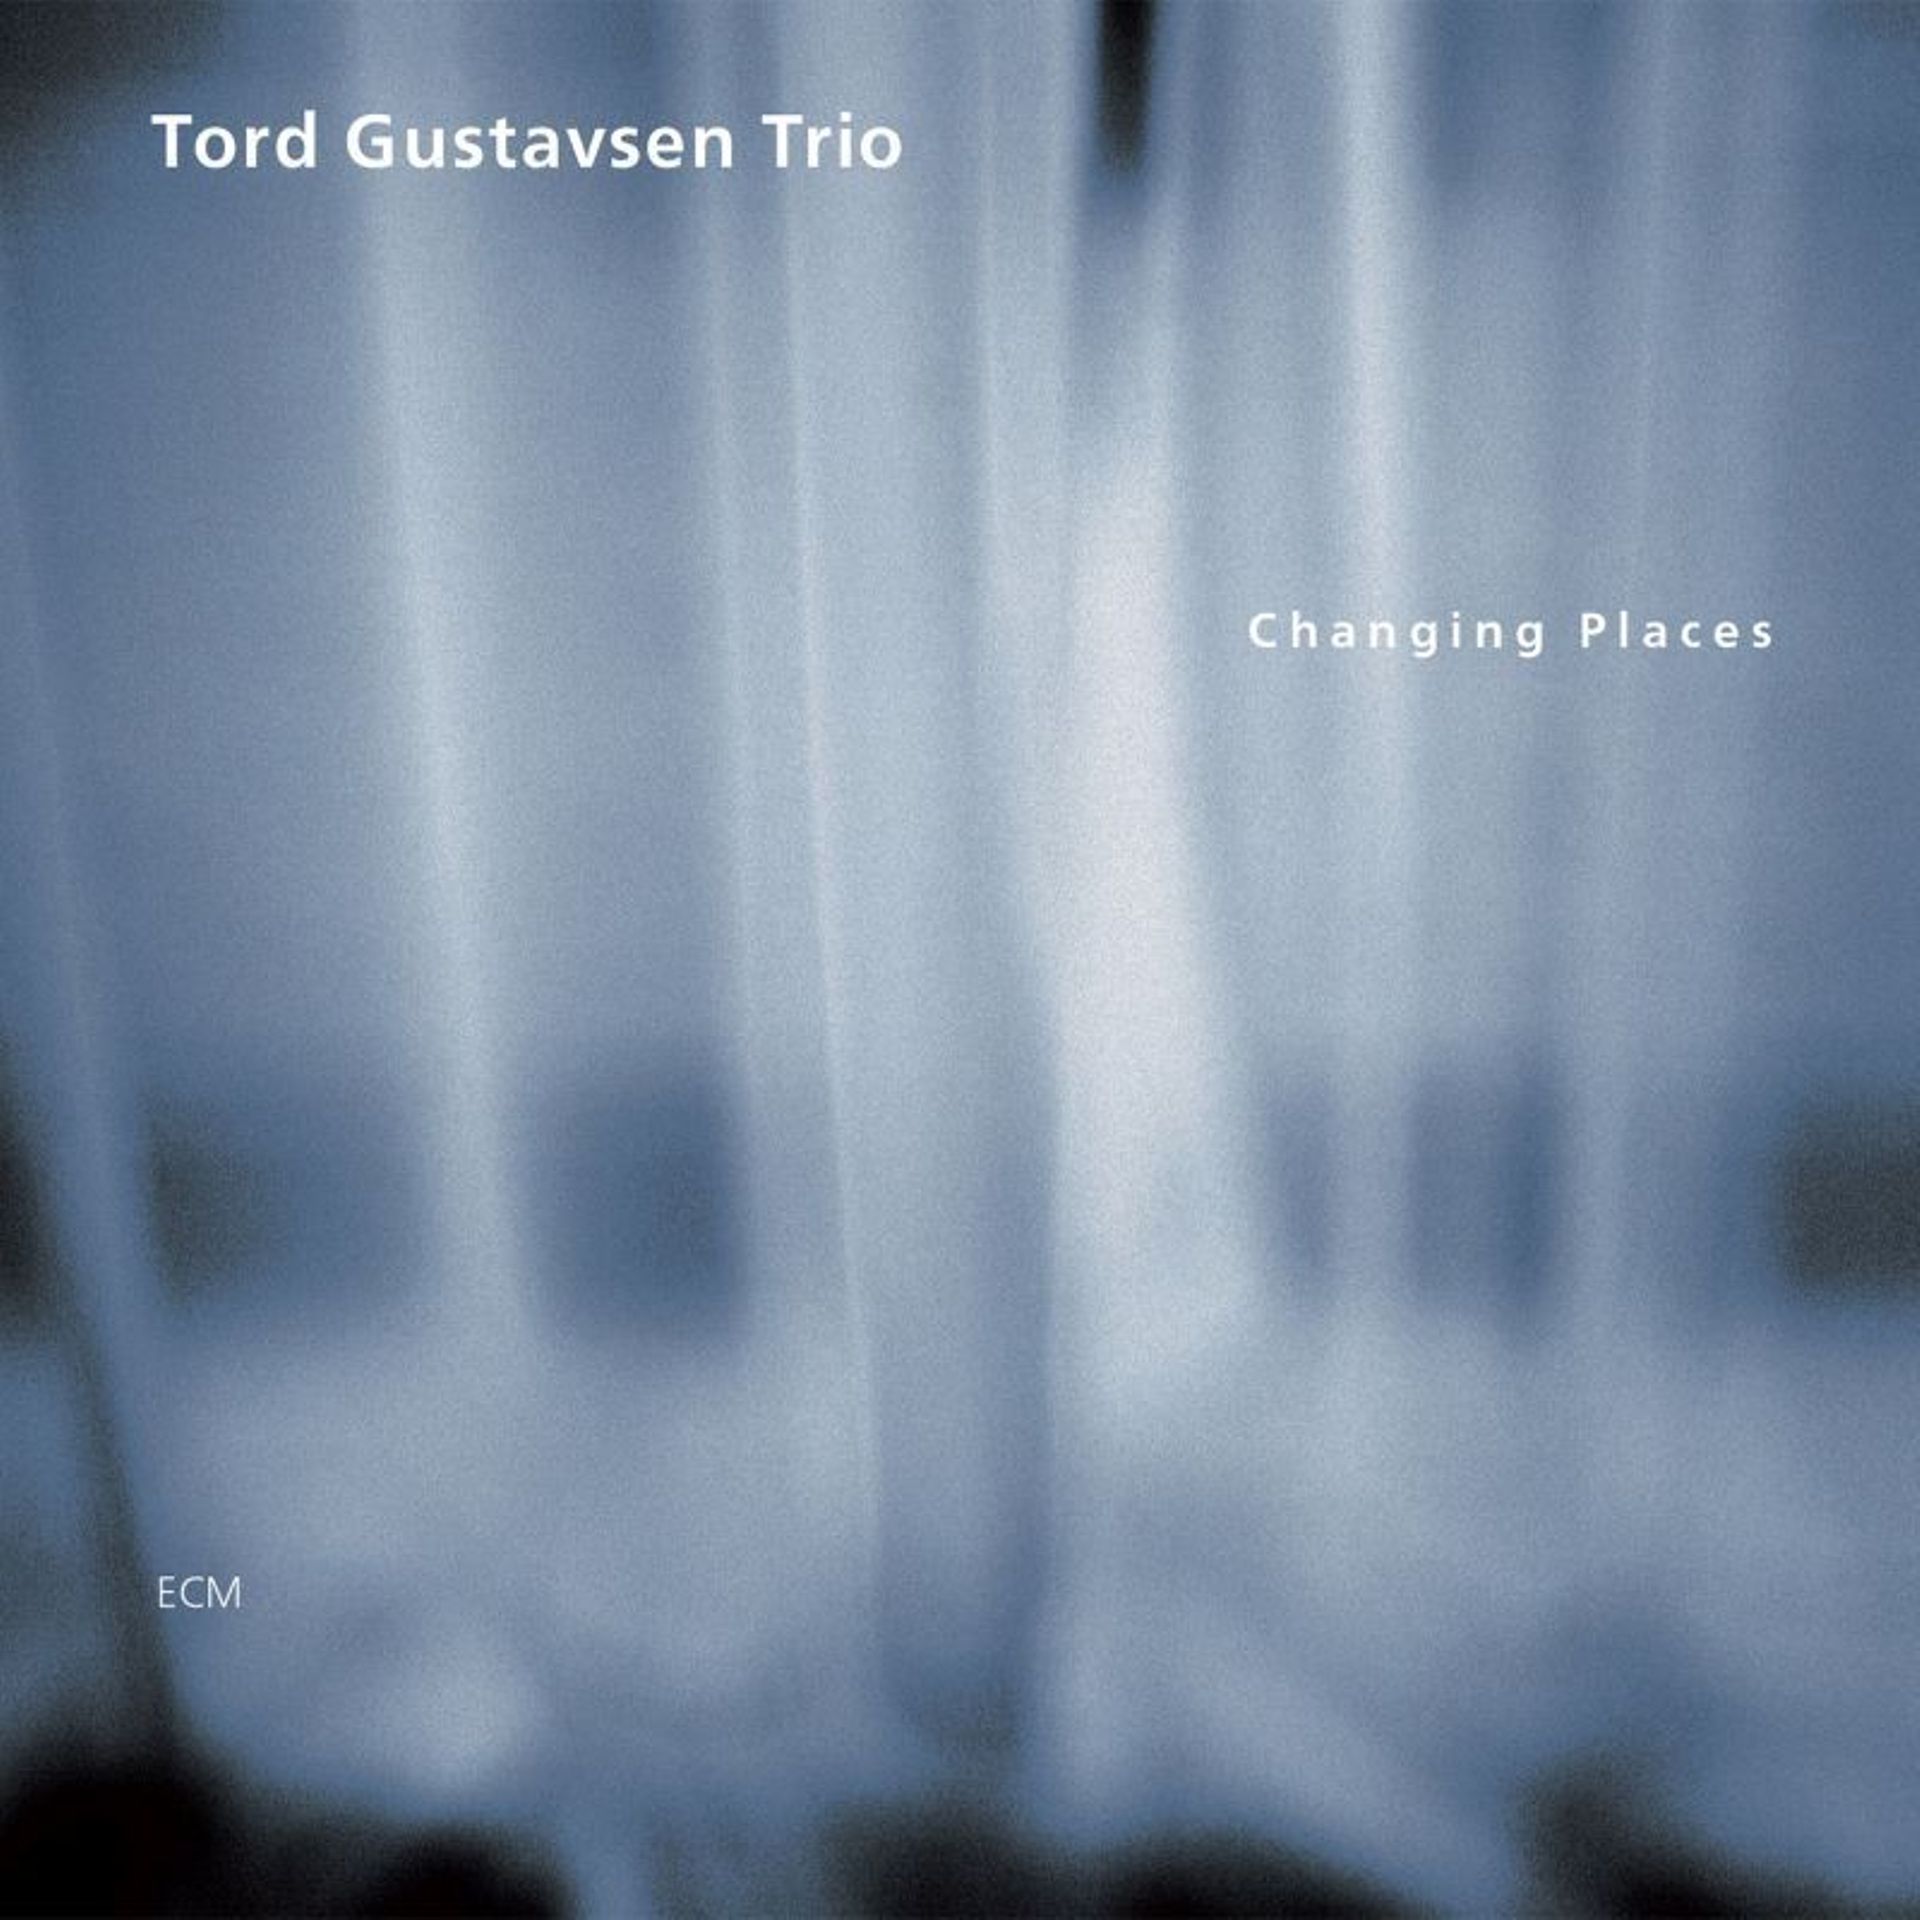 Tord Gustavson Trio : Changing Places (2003)